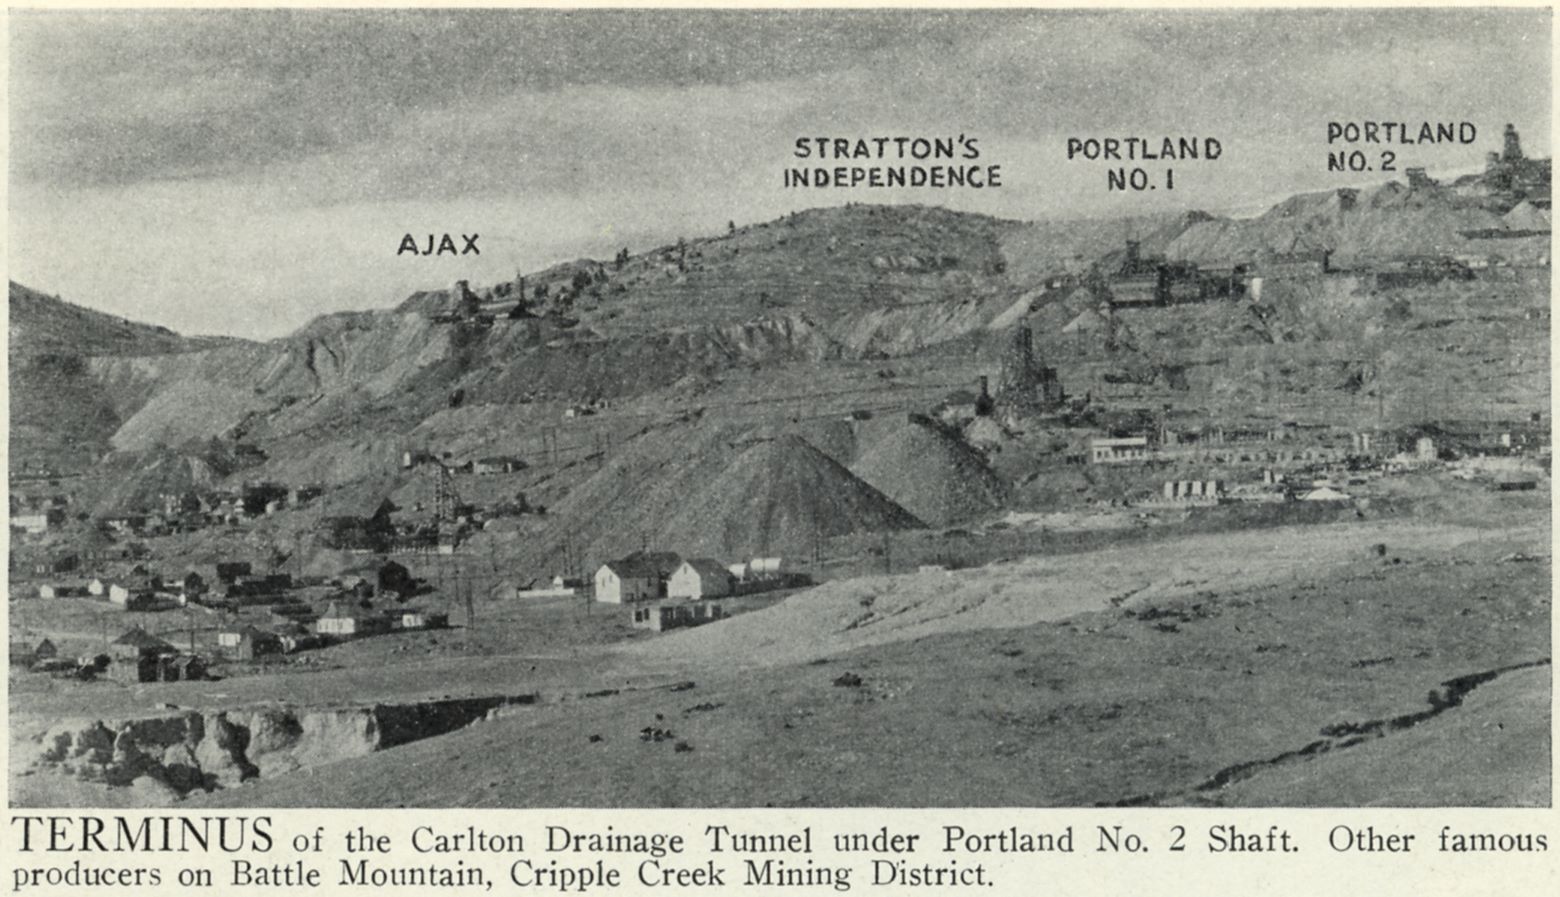 This is an overview of some of the famous mines, making Victor, Colorado, ''The City of Mines''.
   Battle Mountain where some of the mines are nicely marked out. The strong Mine is seen just below middle top/down and just left of the Word ''AJAX'' on the left side of this view. The Independence is see sort of in the foreground with massive dump piles extending towards the photographer, while the Portland mines dumps fill the upper part of Battle Mountain on the top right part of the view.
   Town of Victor is partly seen in lower left, while the Ajax Mine is nicely marked out but still hiding behind some pretty massive big dumps on the upper left part of this view.